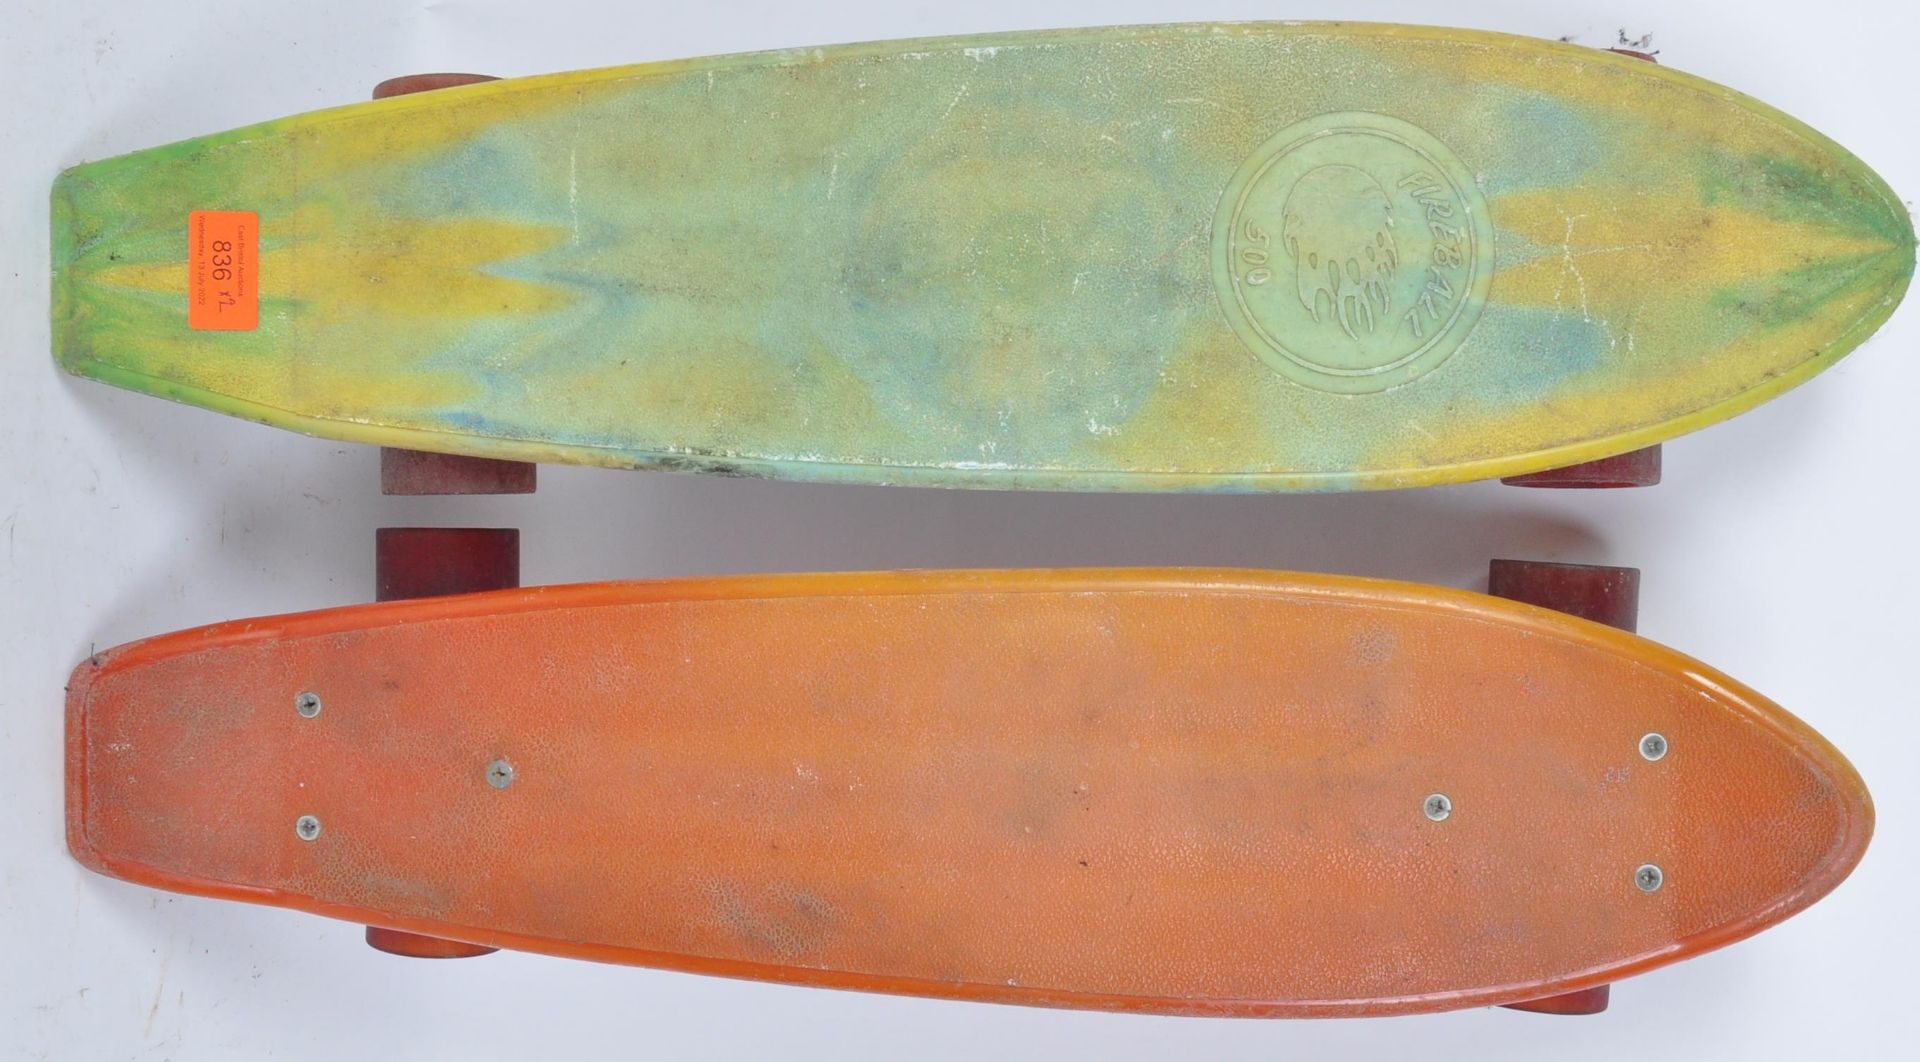 TWO VINTAGE SKATEBOARDS - FIREBALL 500 & ANOTHER